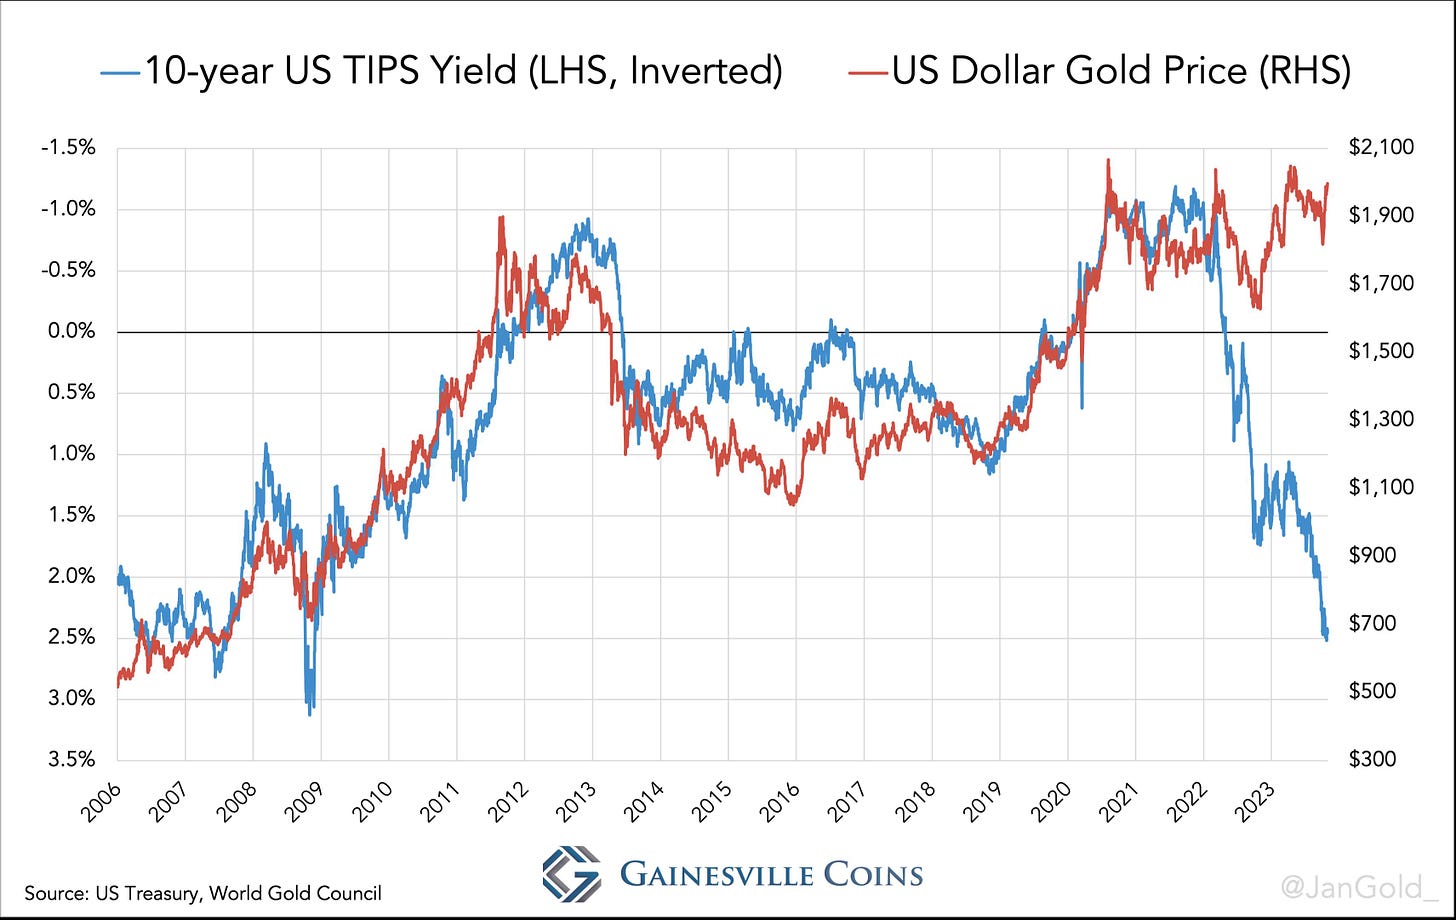 chart plotting the gold price against the 10-year US TIPS yield